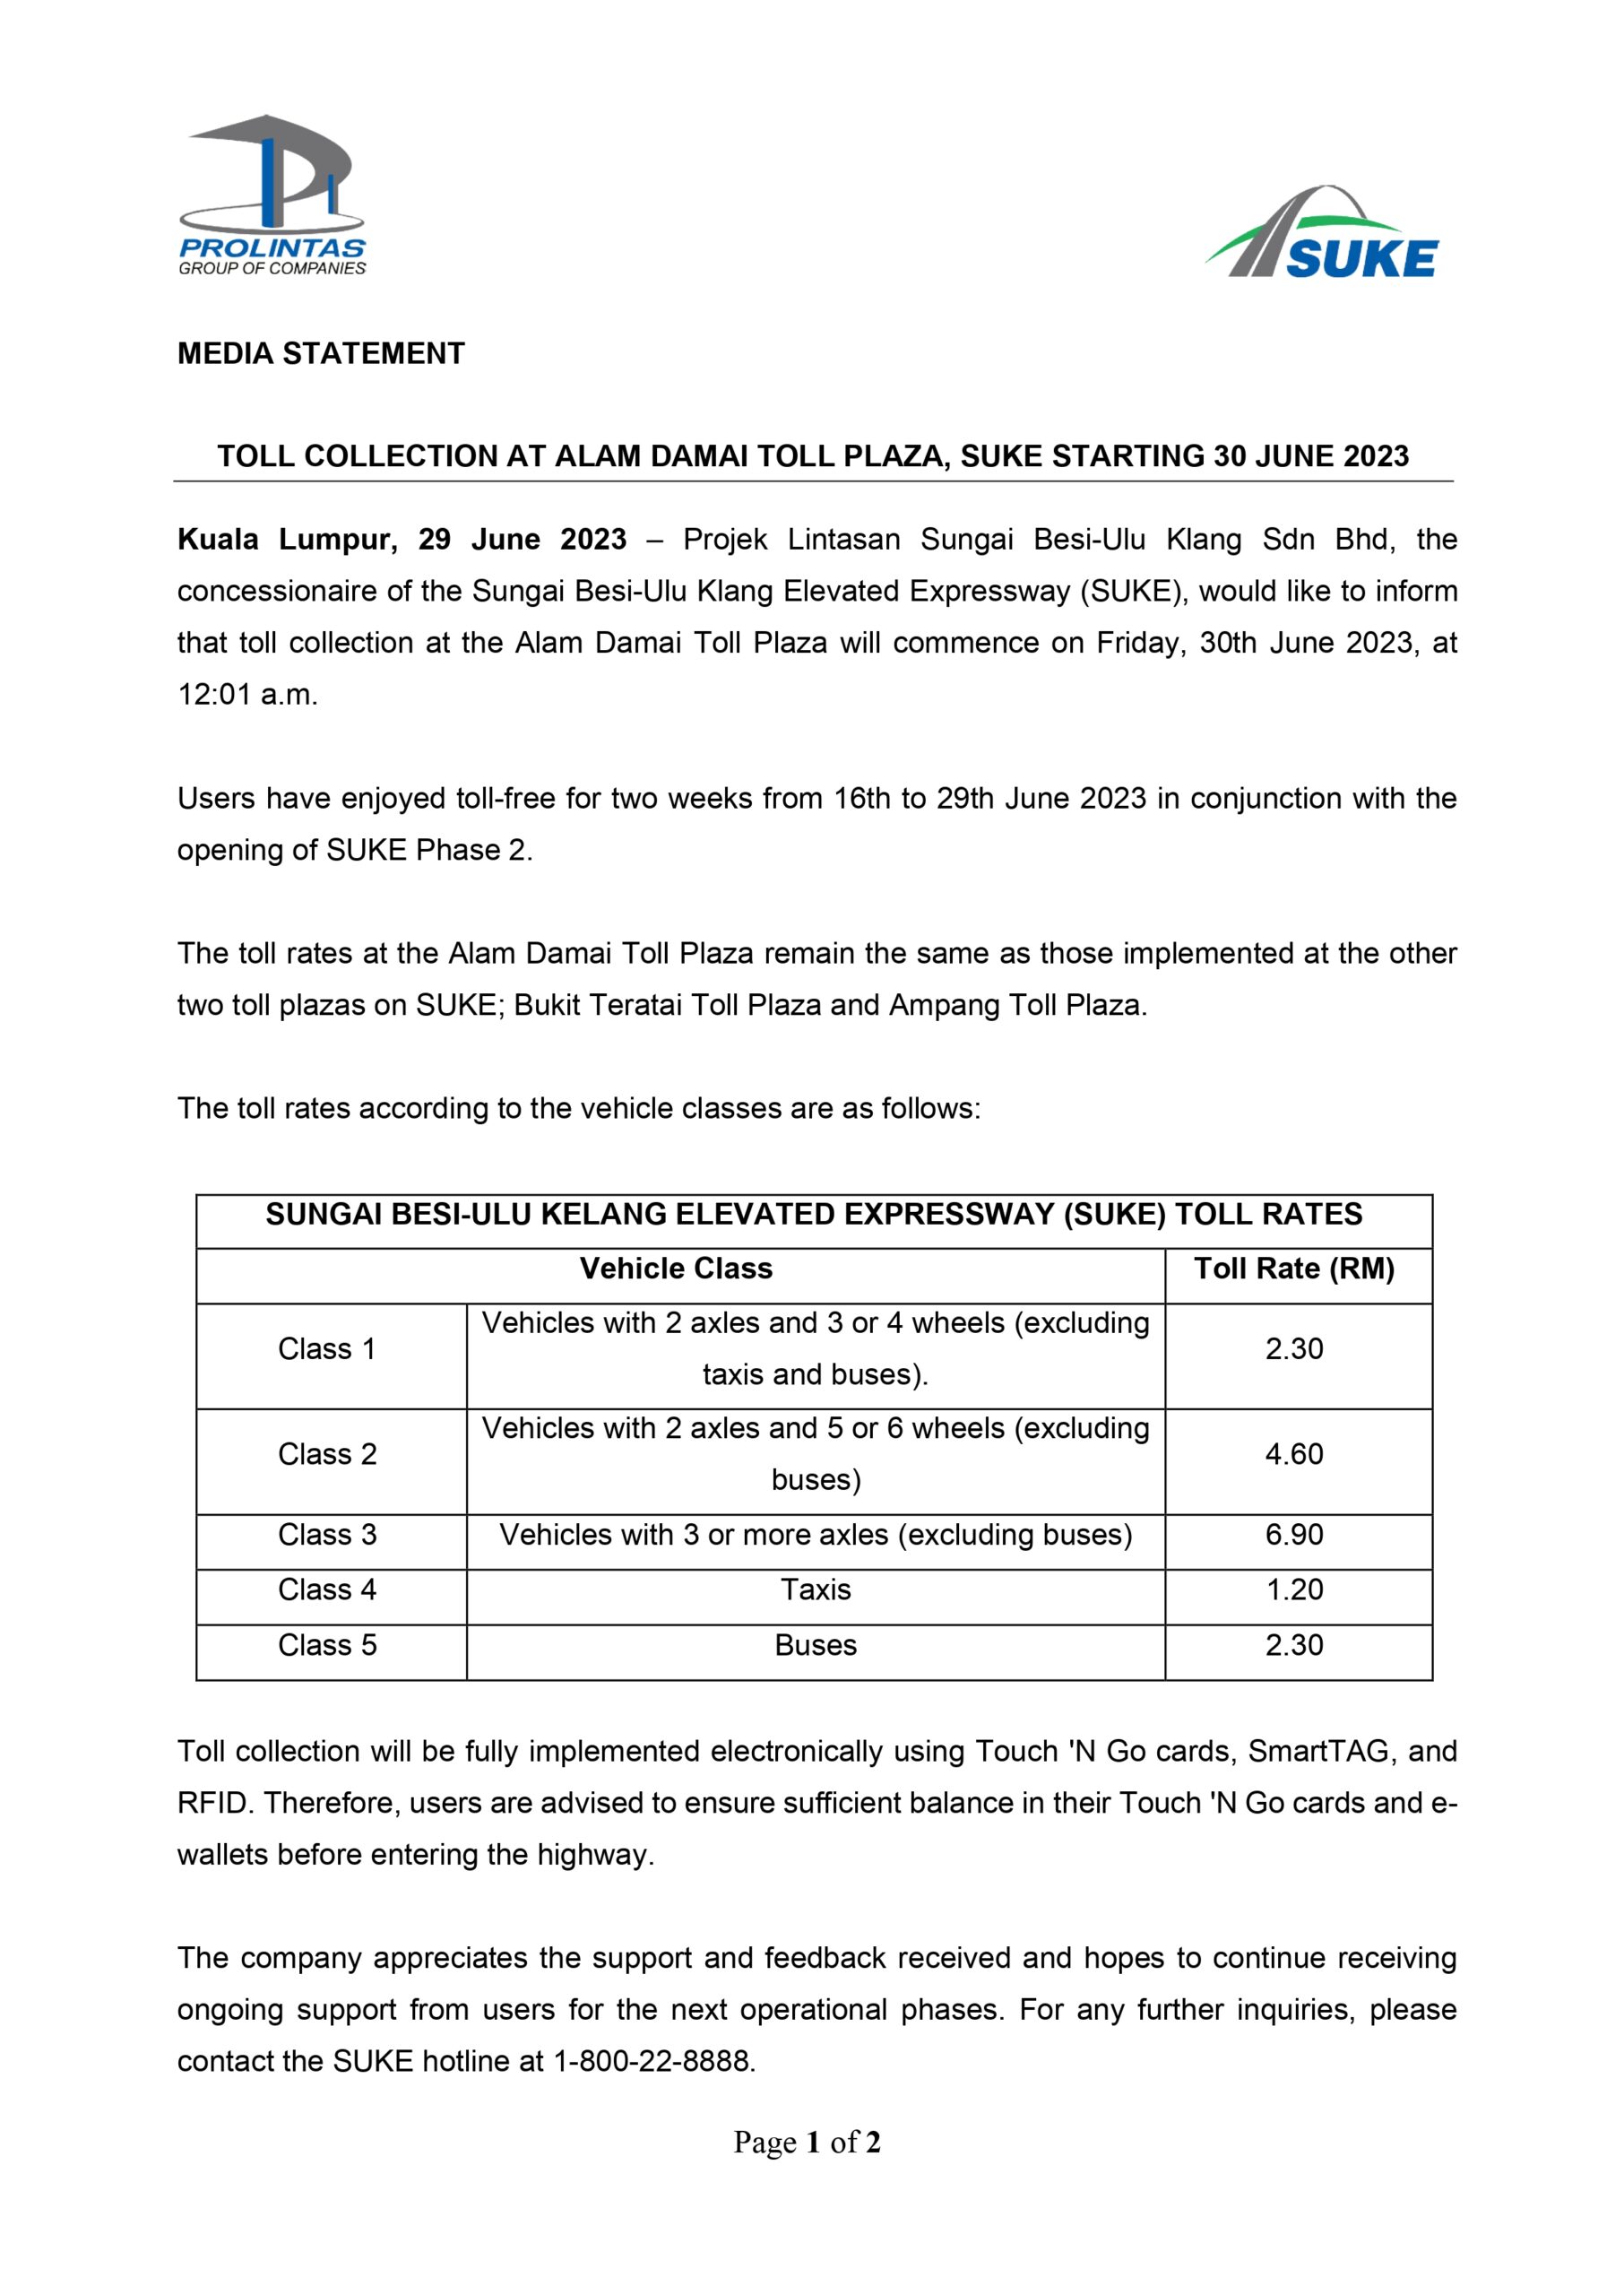 [MEDIA STATEMENT] TOLL COLLECTION AT ALAM DAMAI TOLL PLAZA, SUKE HIGHWAY STARTING FROM 30 JUNE 2023